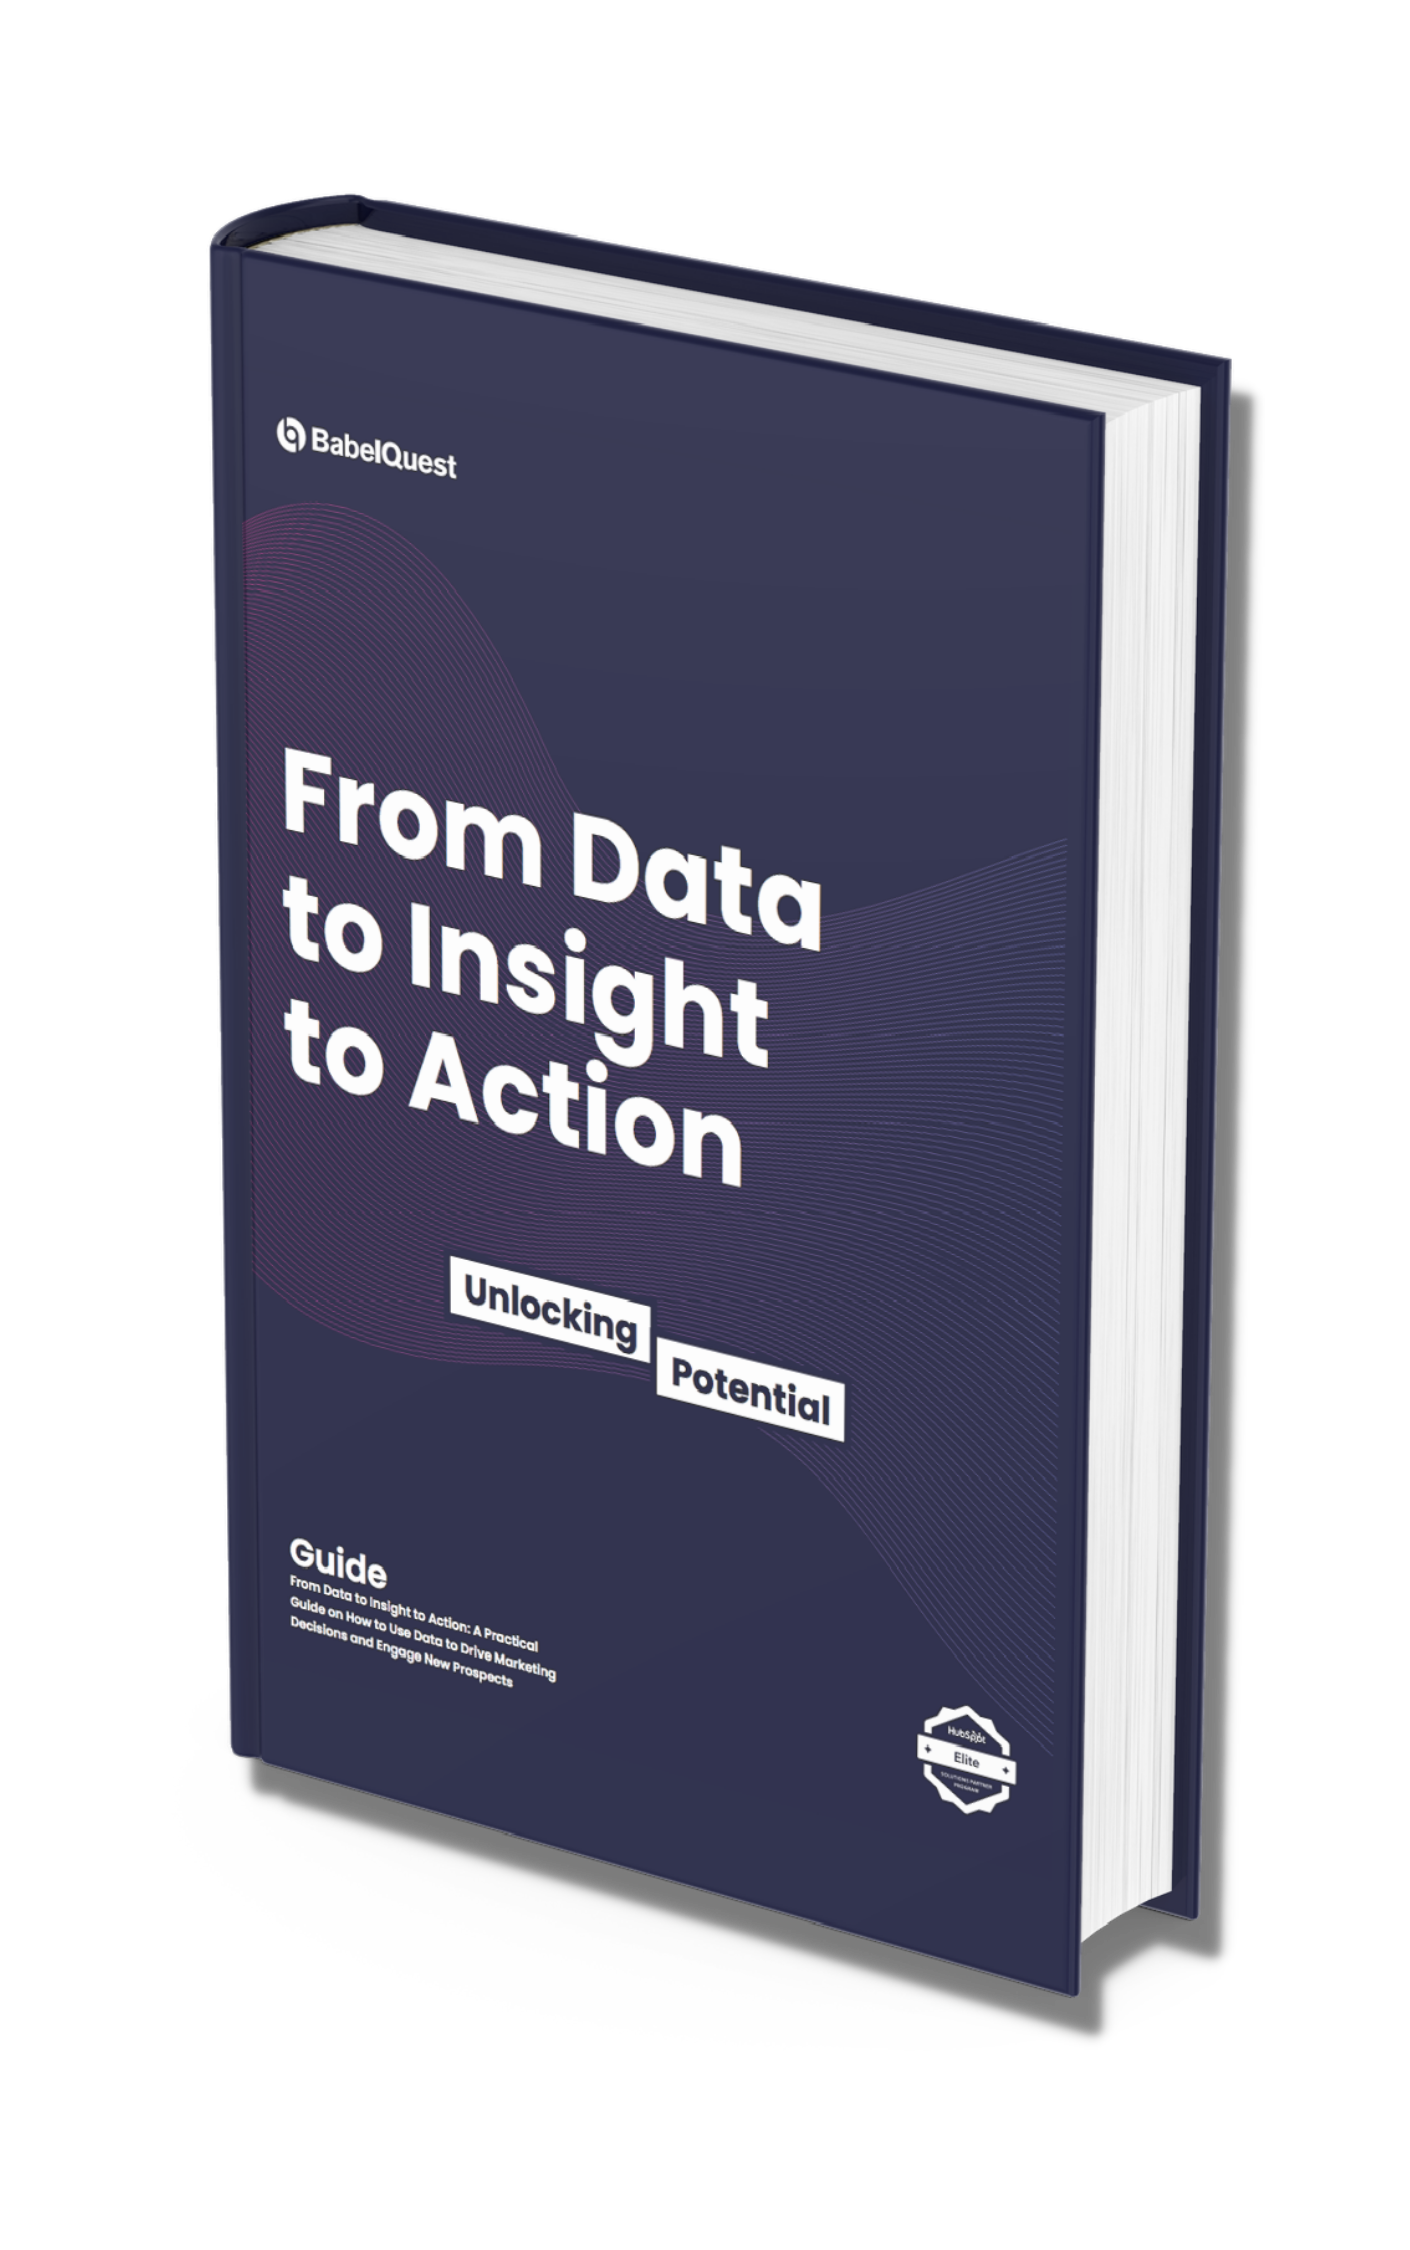 offer-ebook-from-data-to-insight-to-action-book